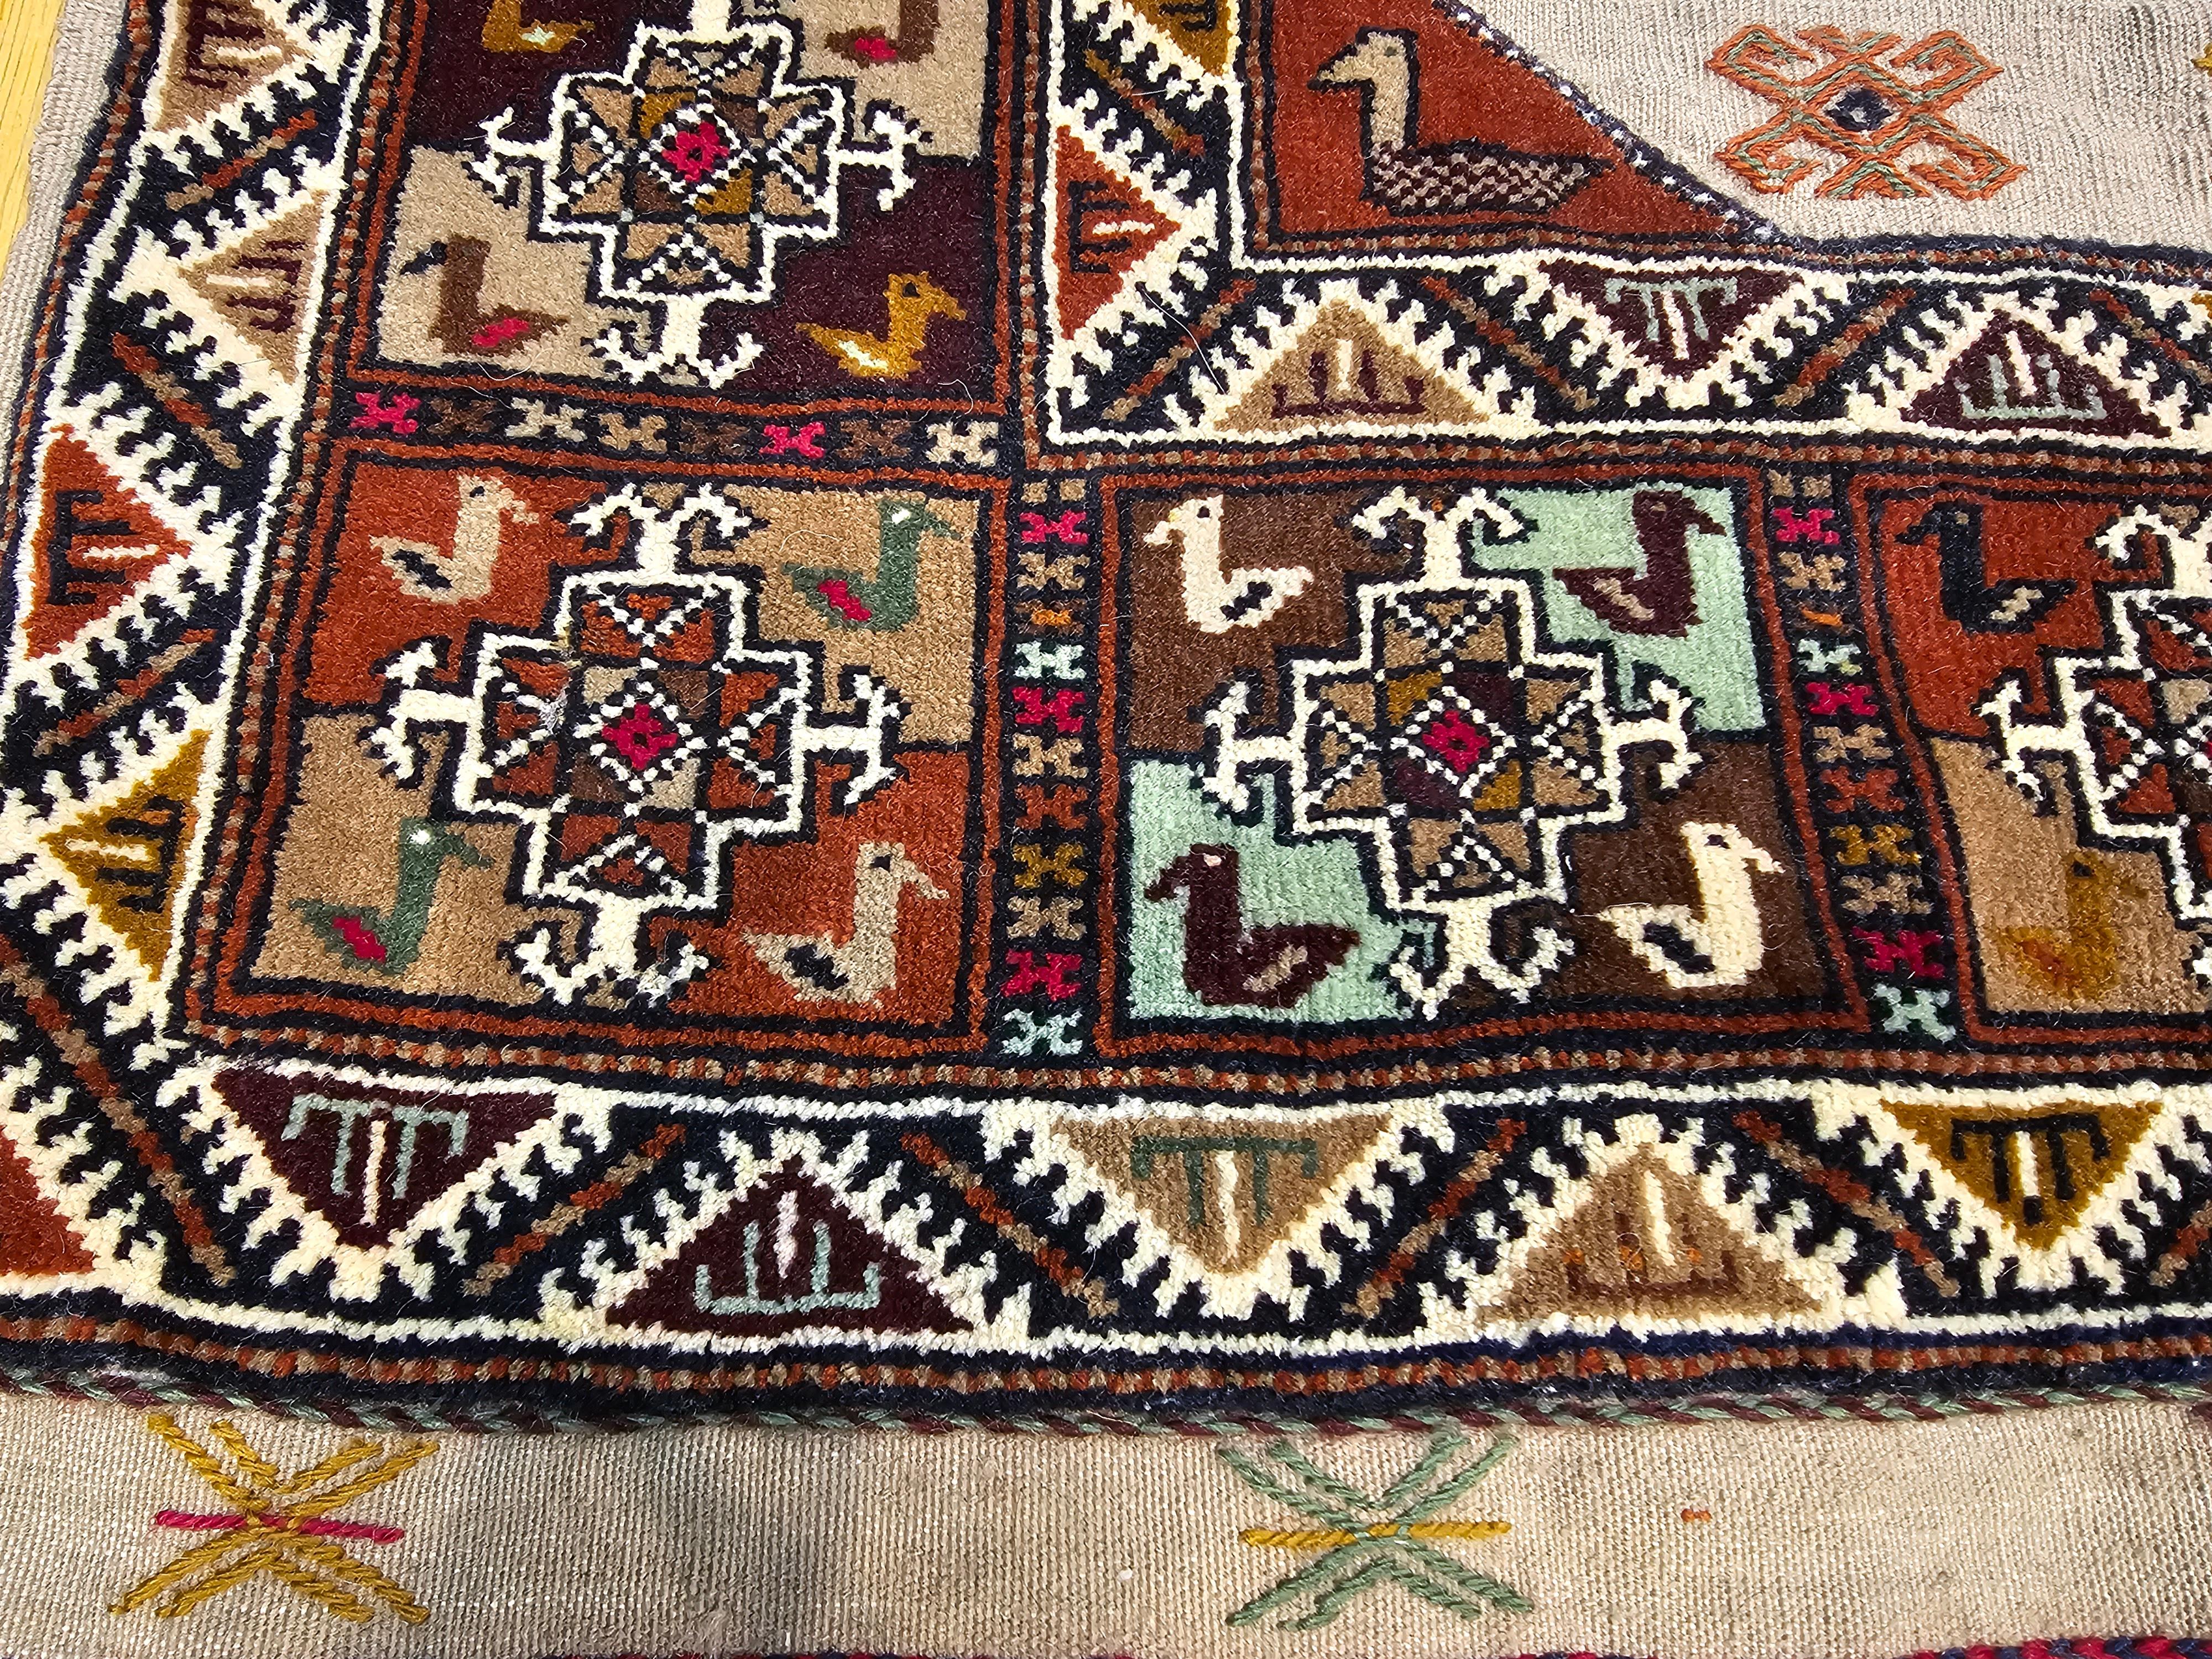 Vintage Hand-Woven Persian Qashqai Tribal Tapestry in Tree of Life Pattern For Sale 5